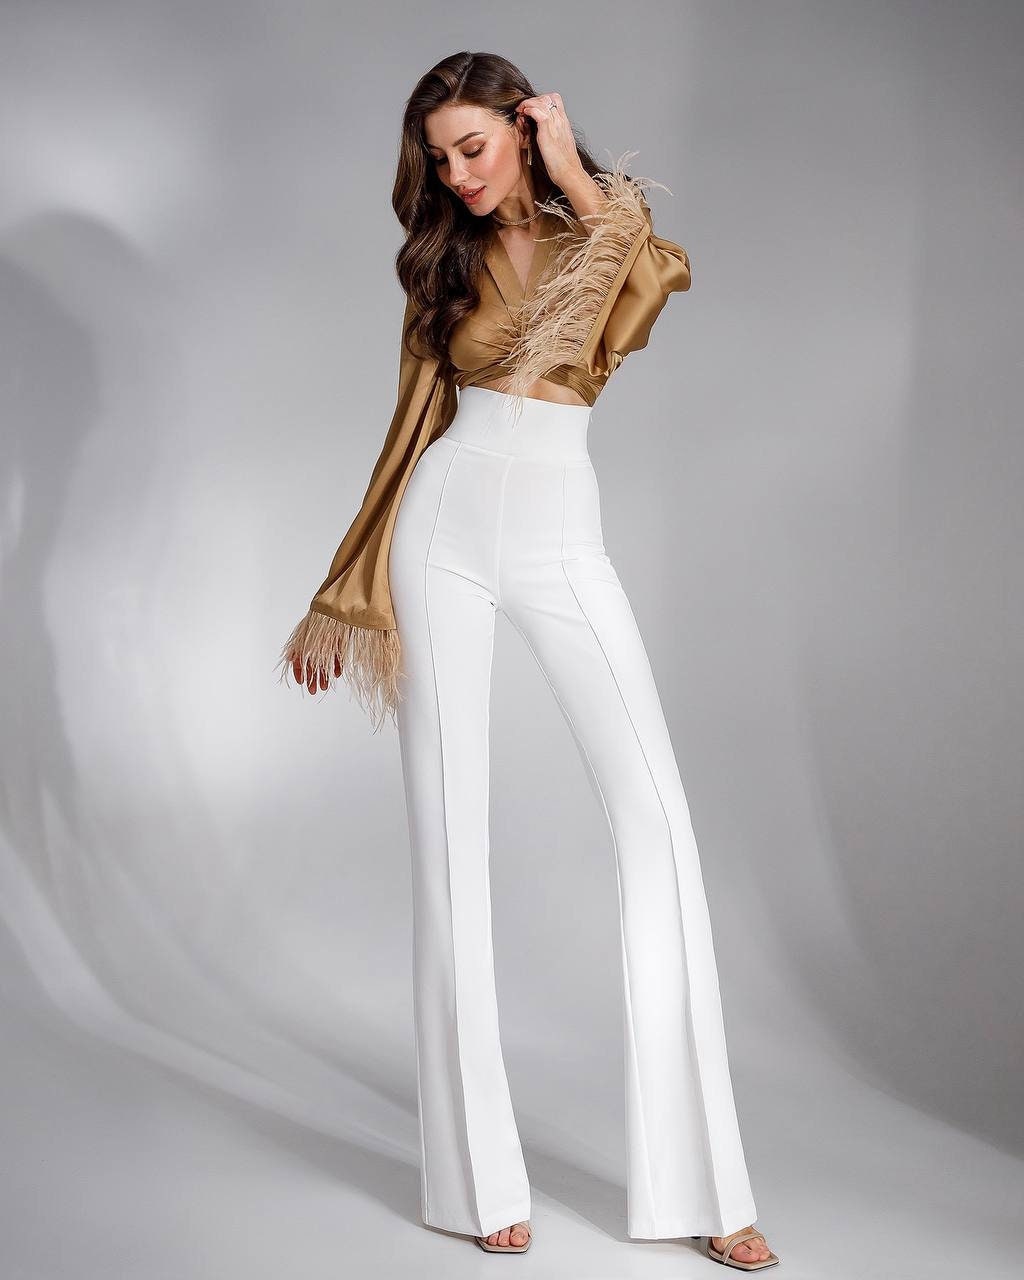 Buy High Waist White Flare Pants, Pants for Women, Office Meeting